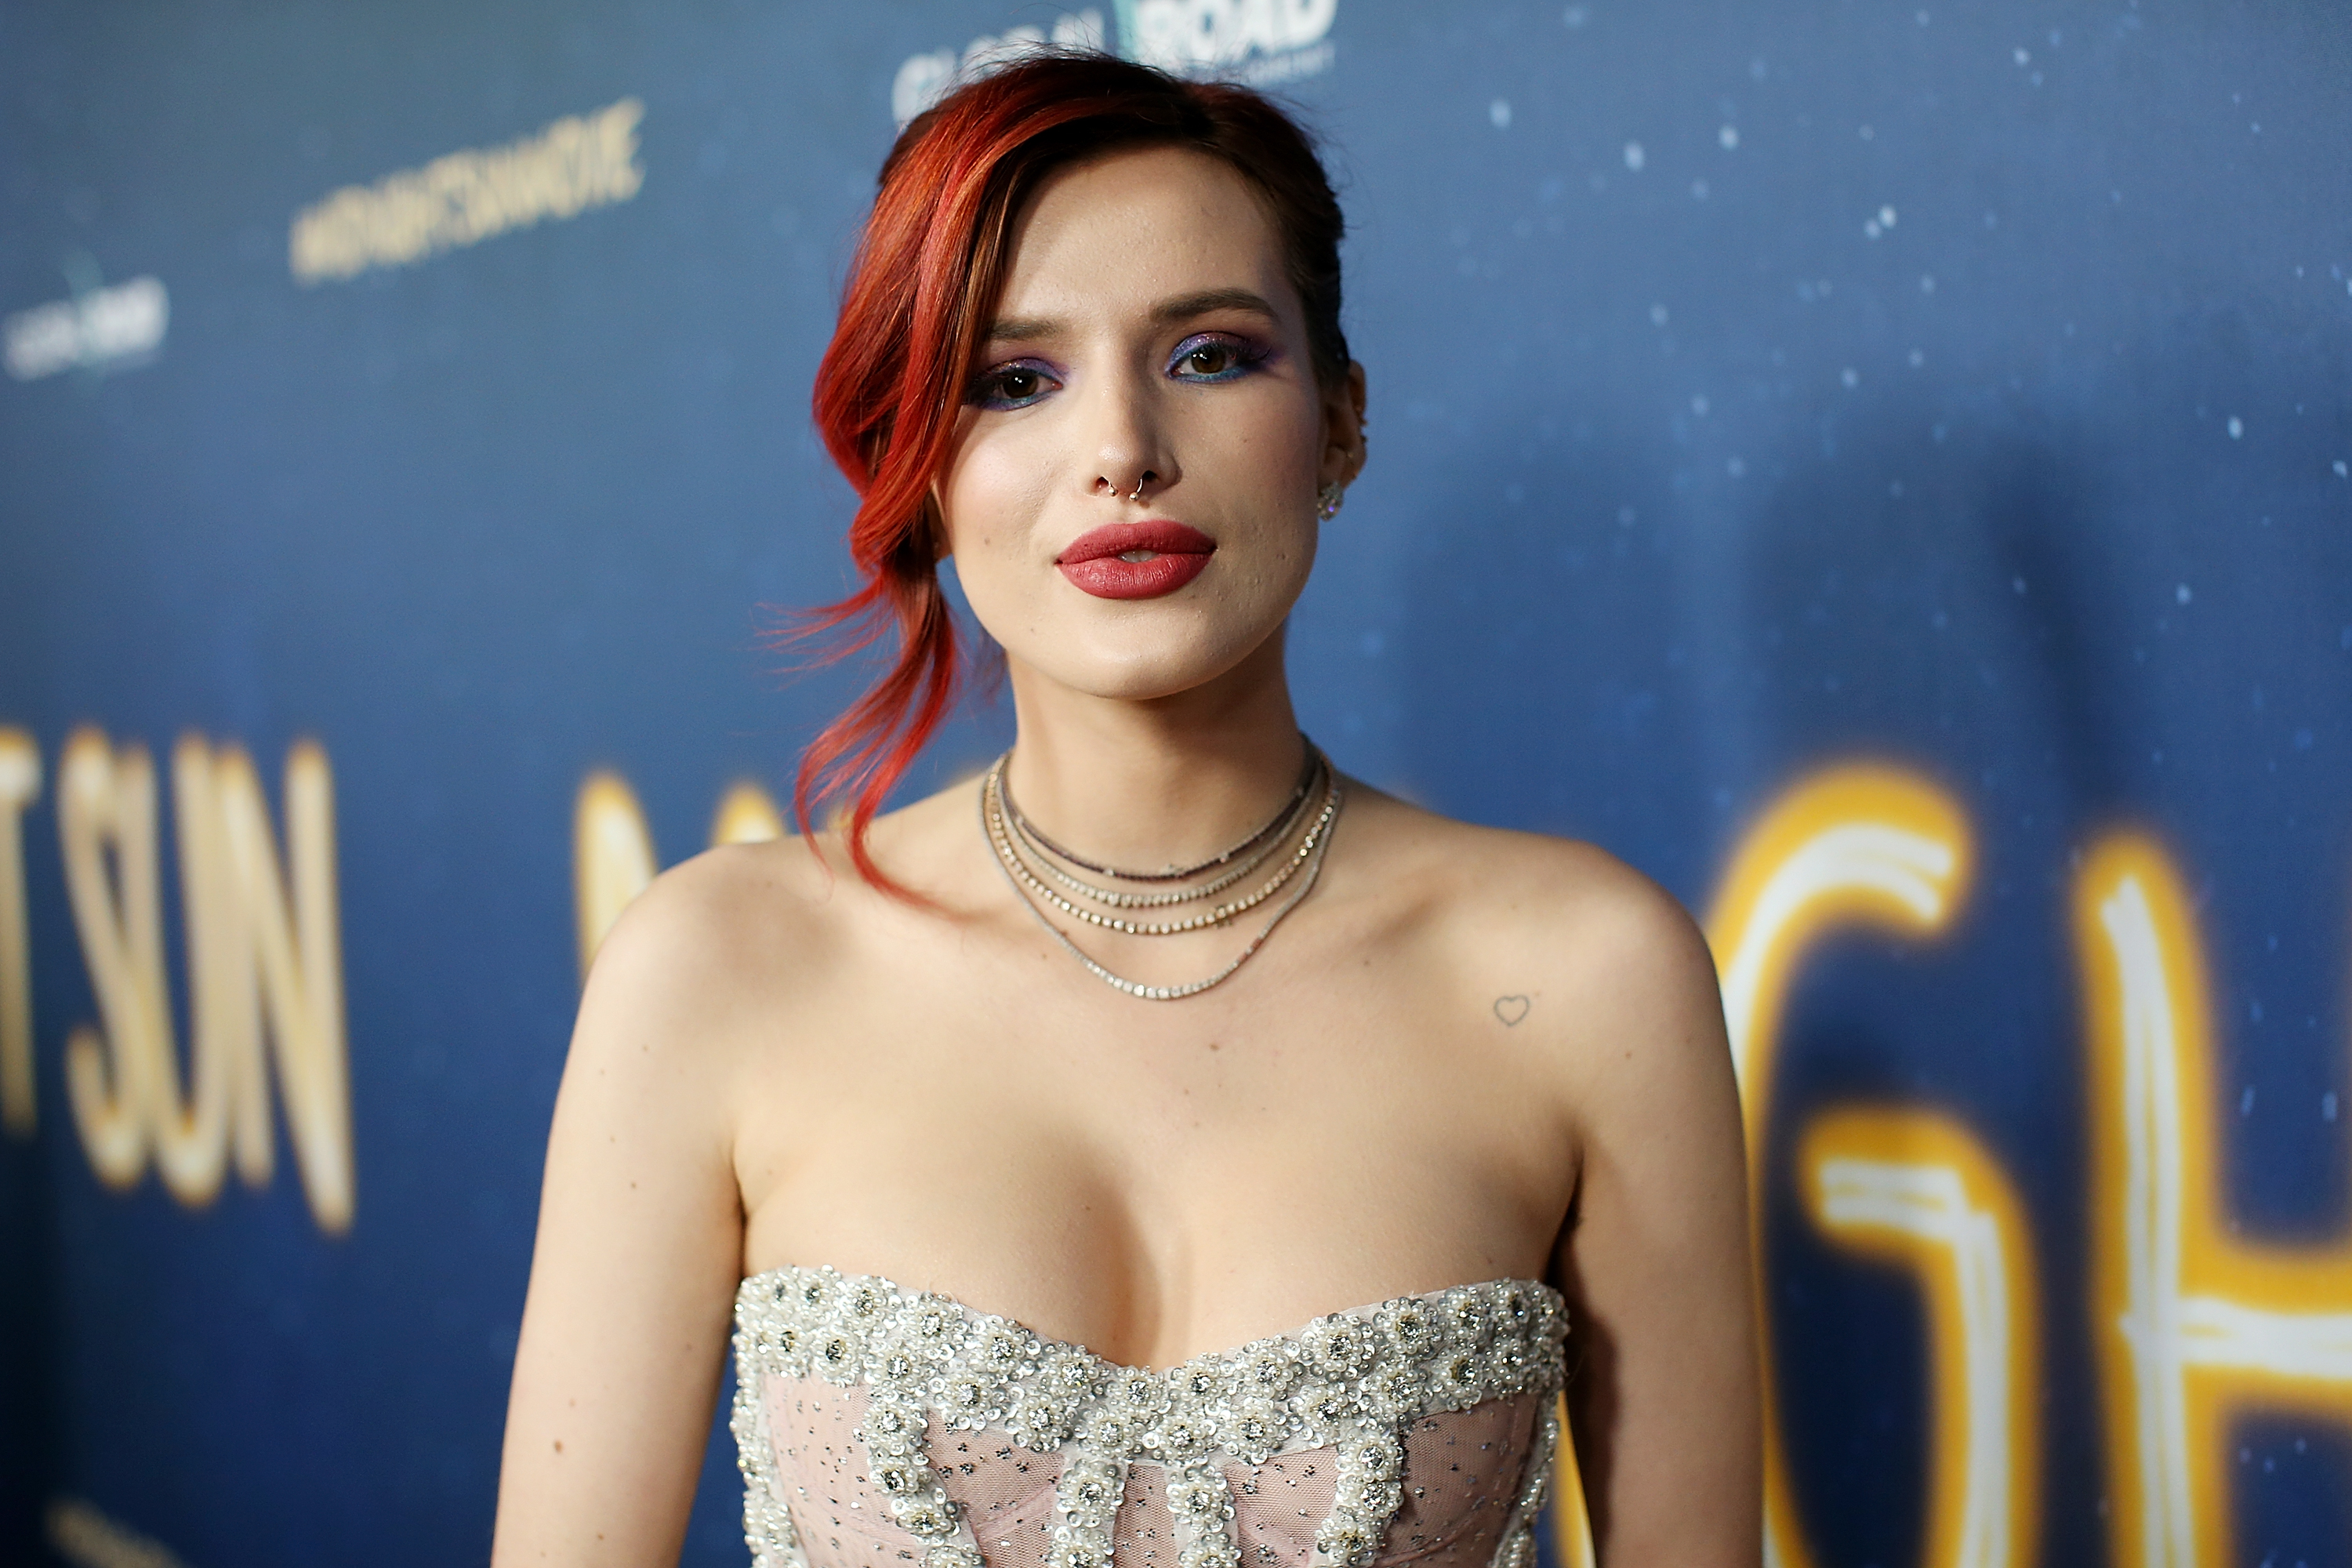 Bella Thorne Lesbian Porn - Culture | Page 396 of 916 | PinkNews